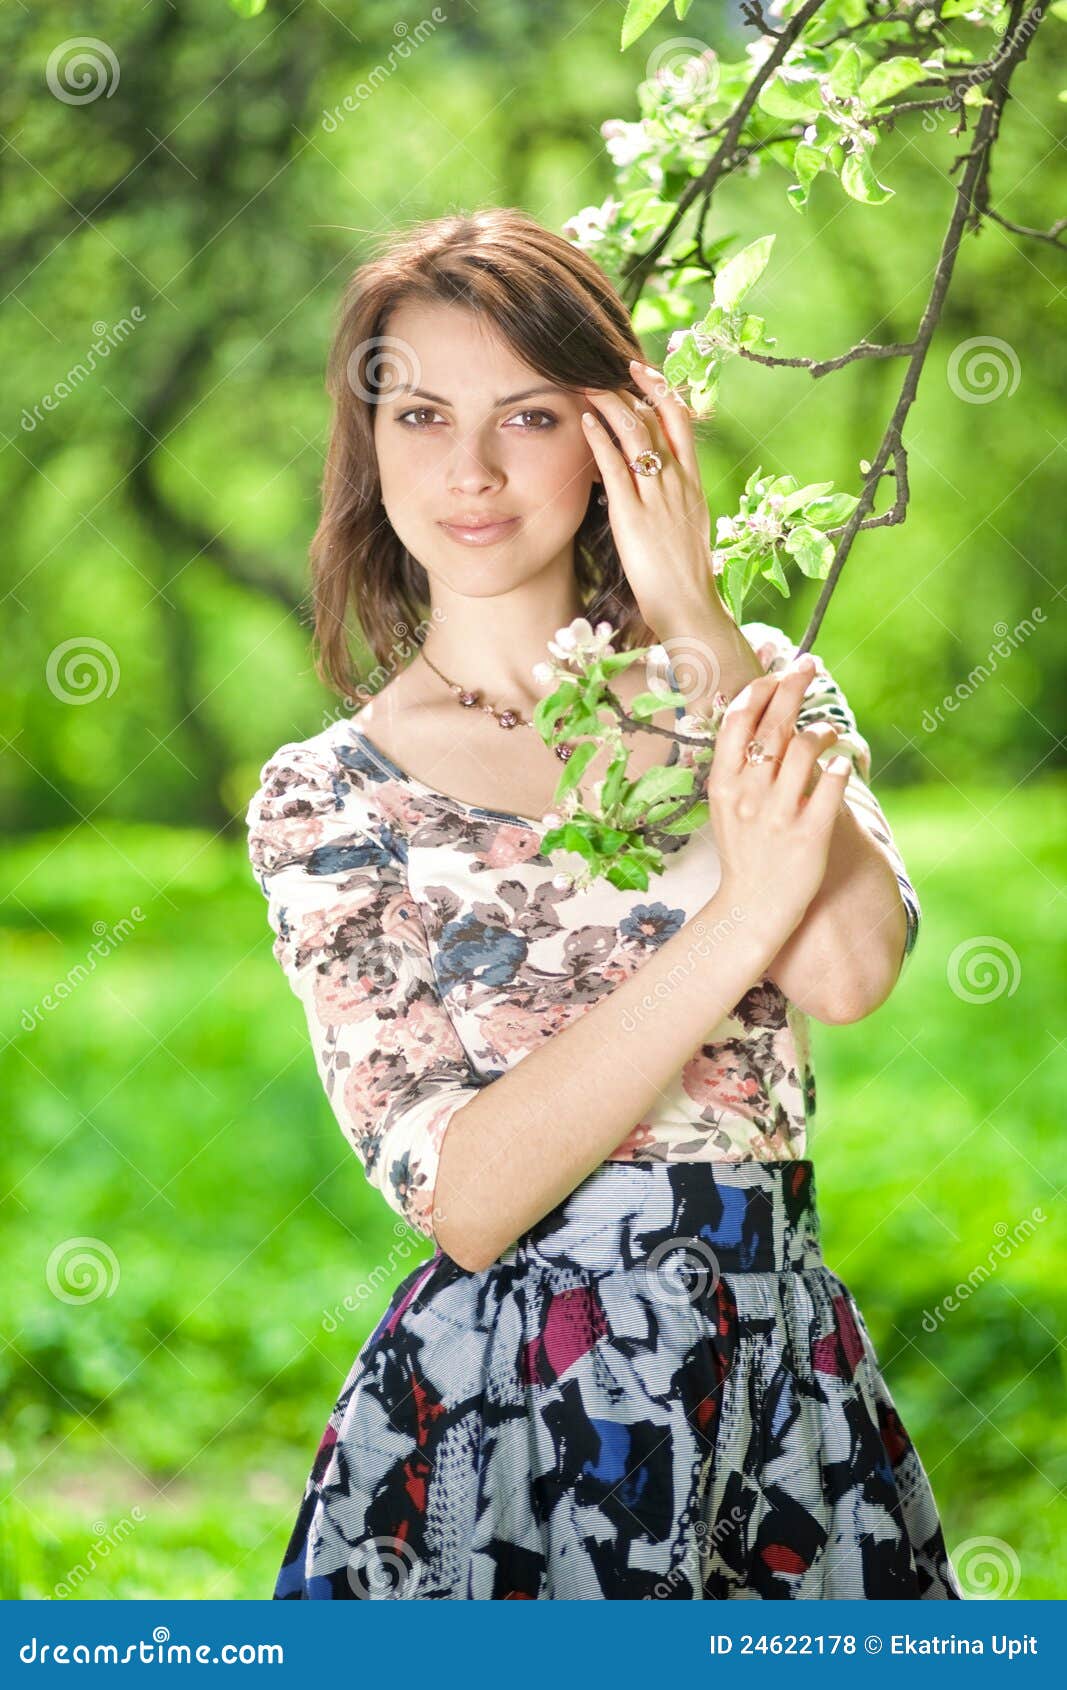 Beautiful young woman stock photo. Image of smile, dress - 24622178